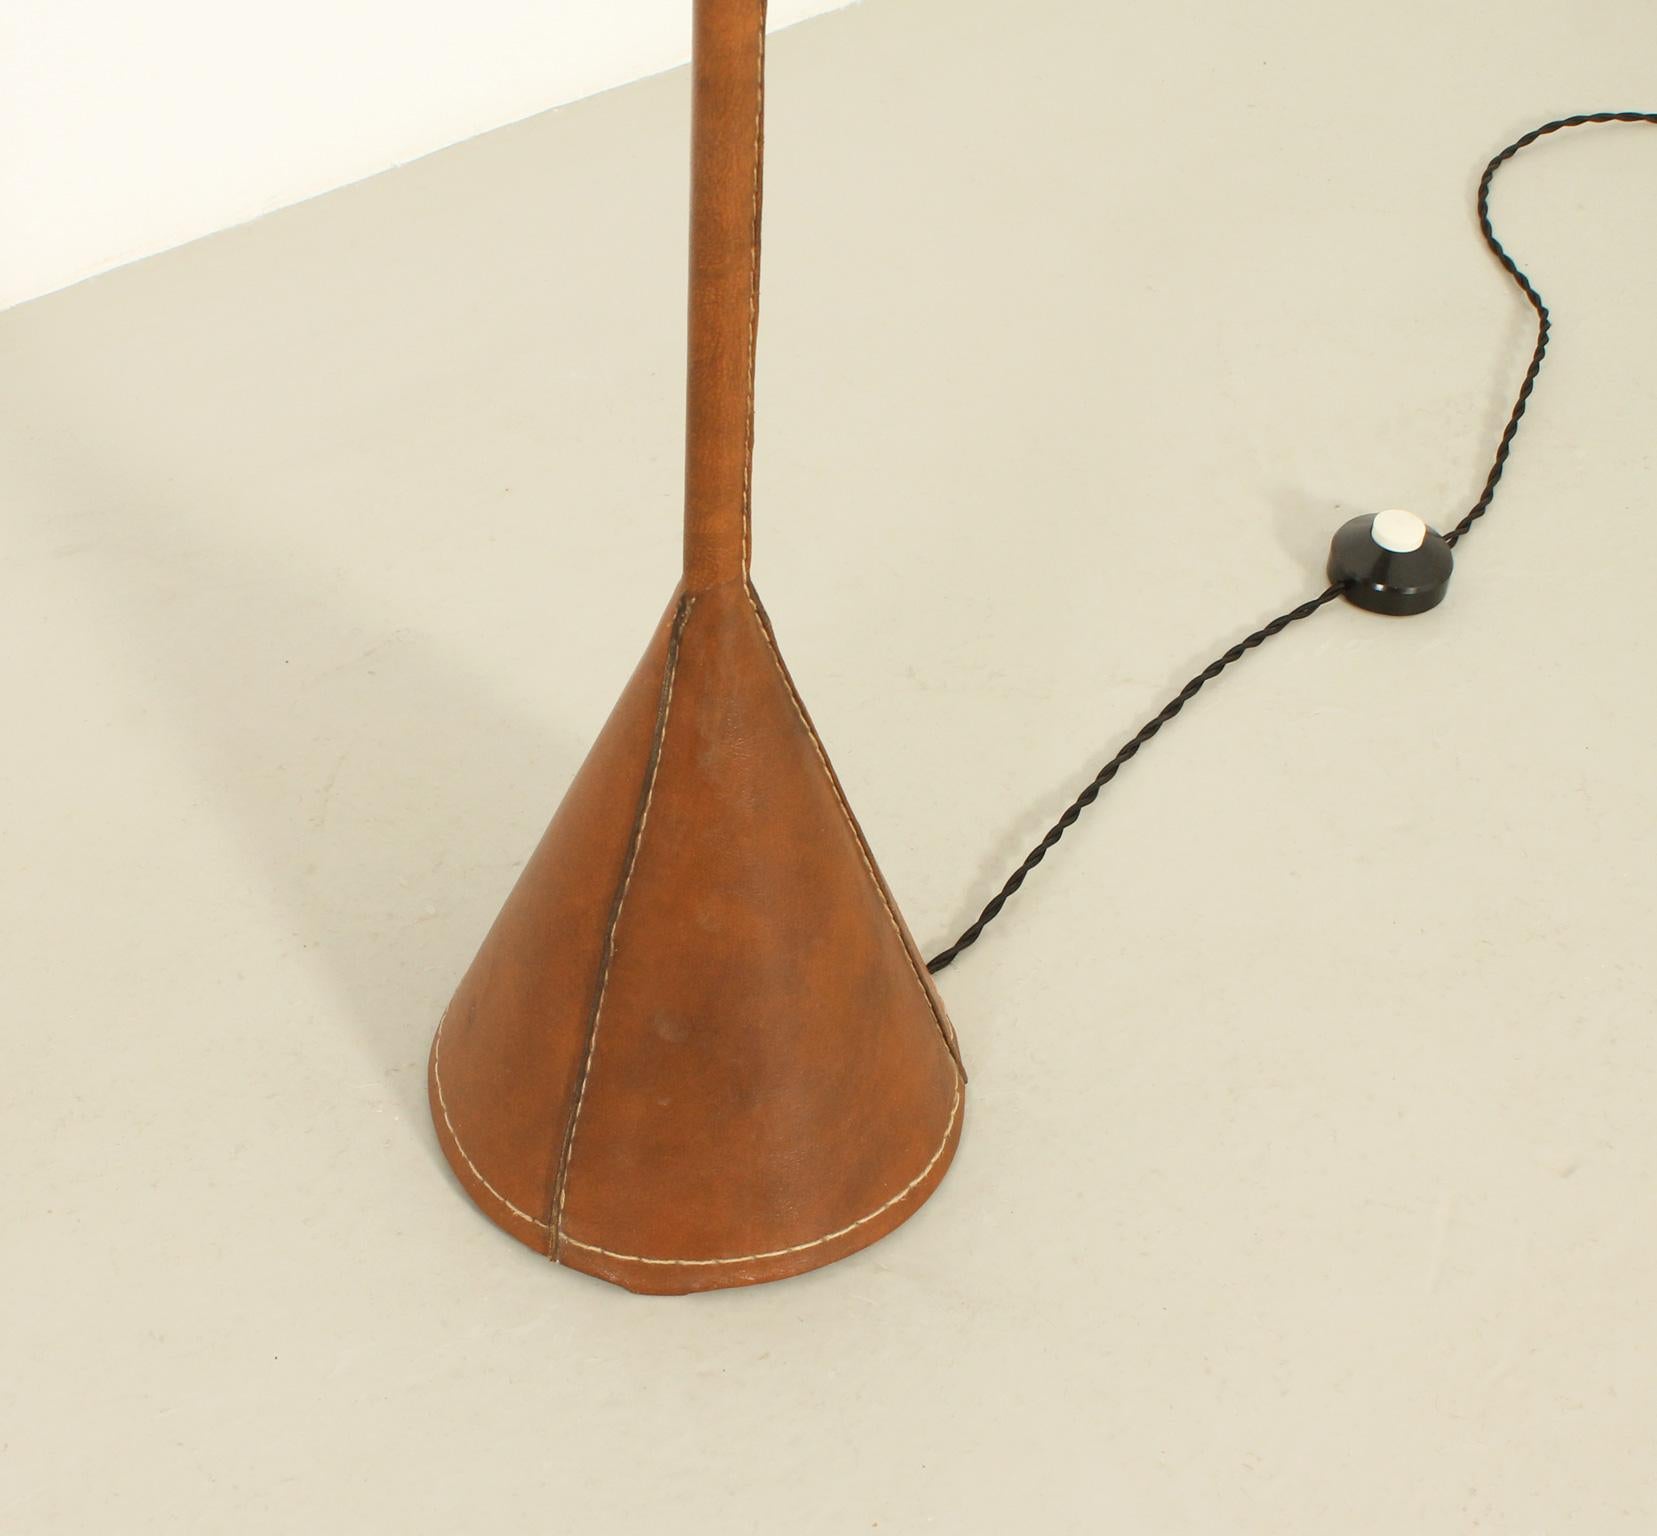 Floor Lamp by Valenti in Brown Leather, Spain, 1950's For Sale 6